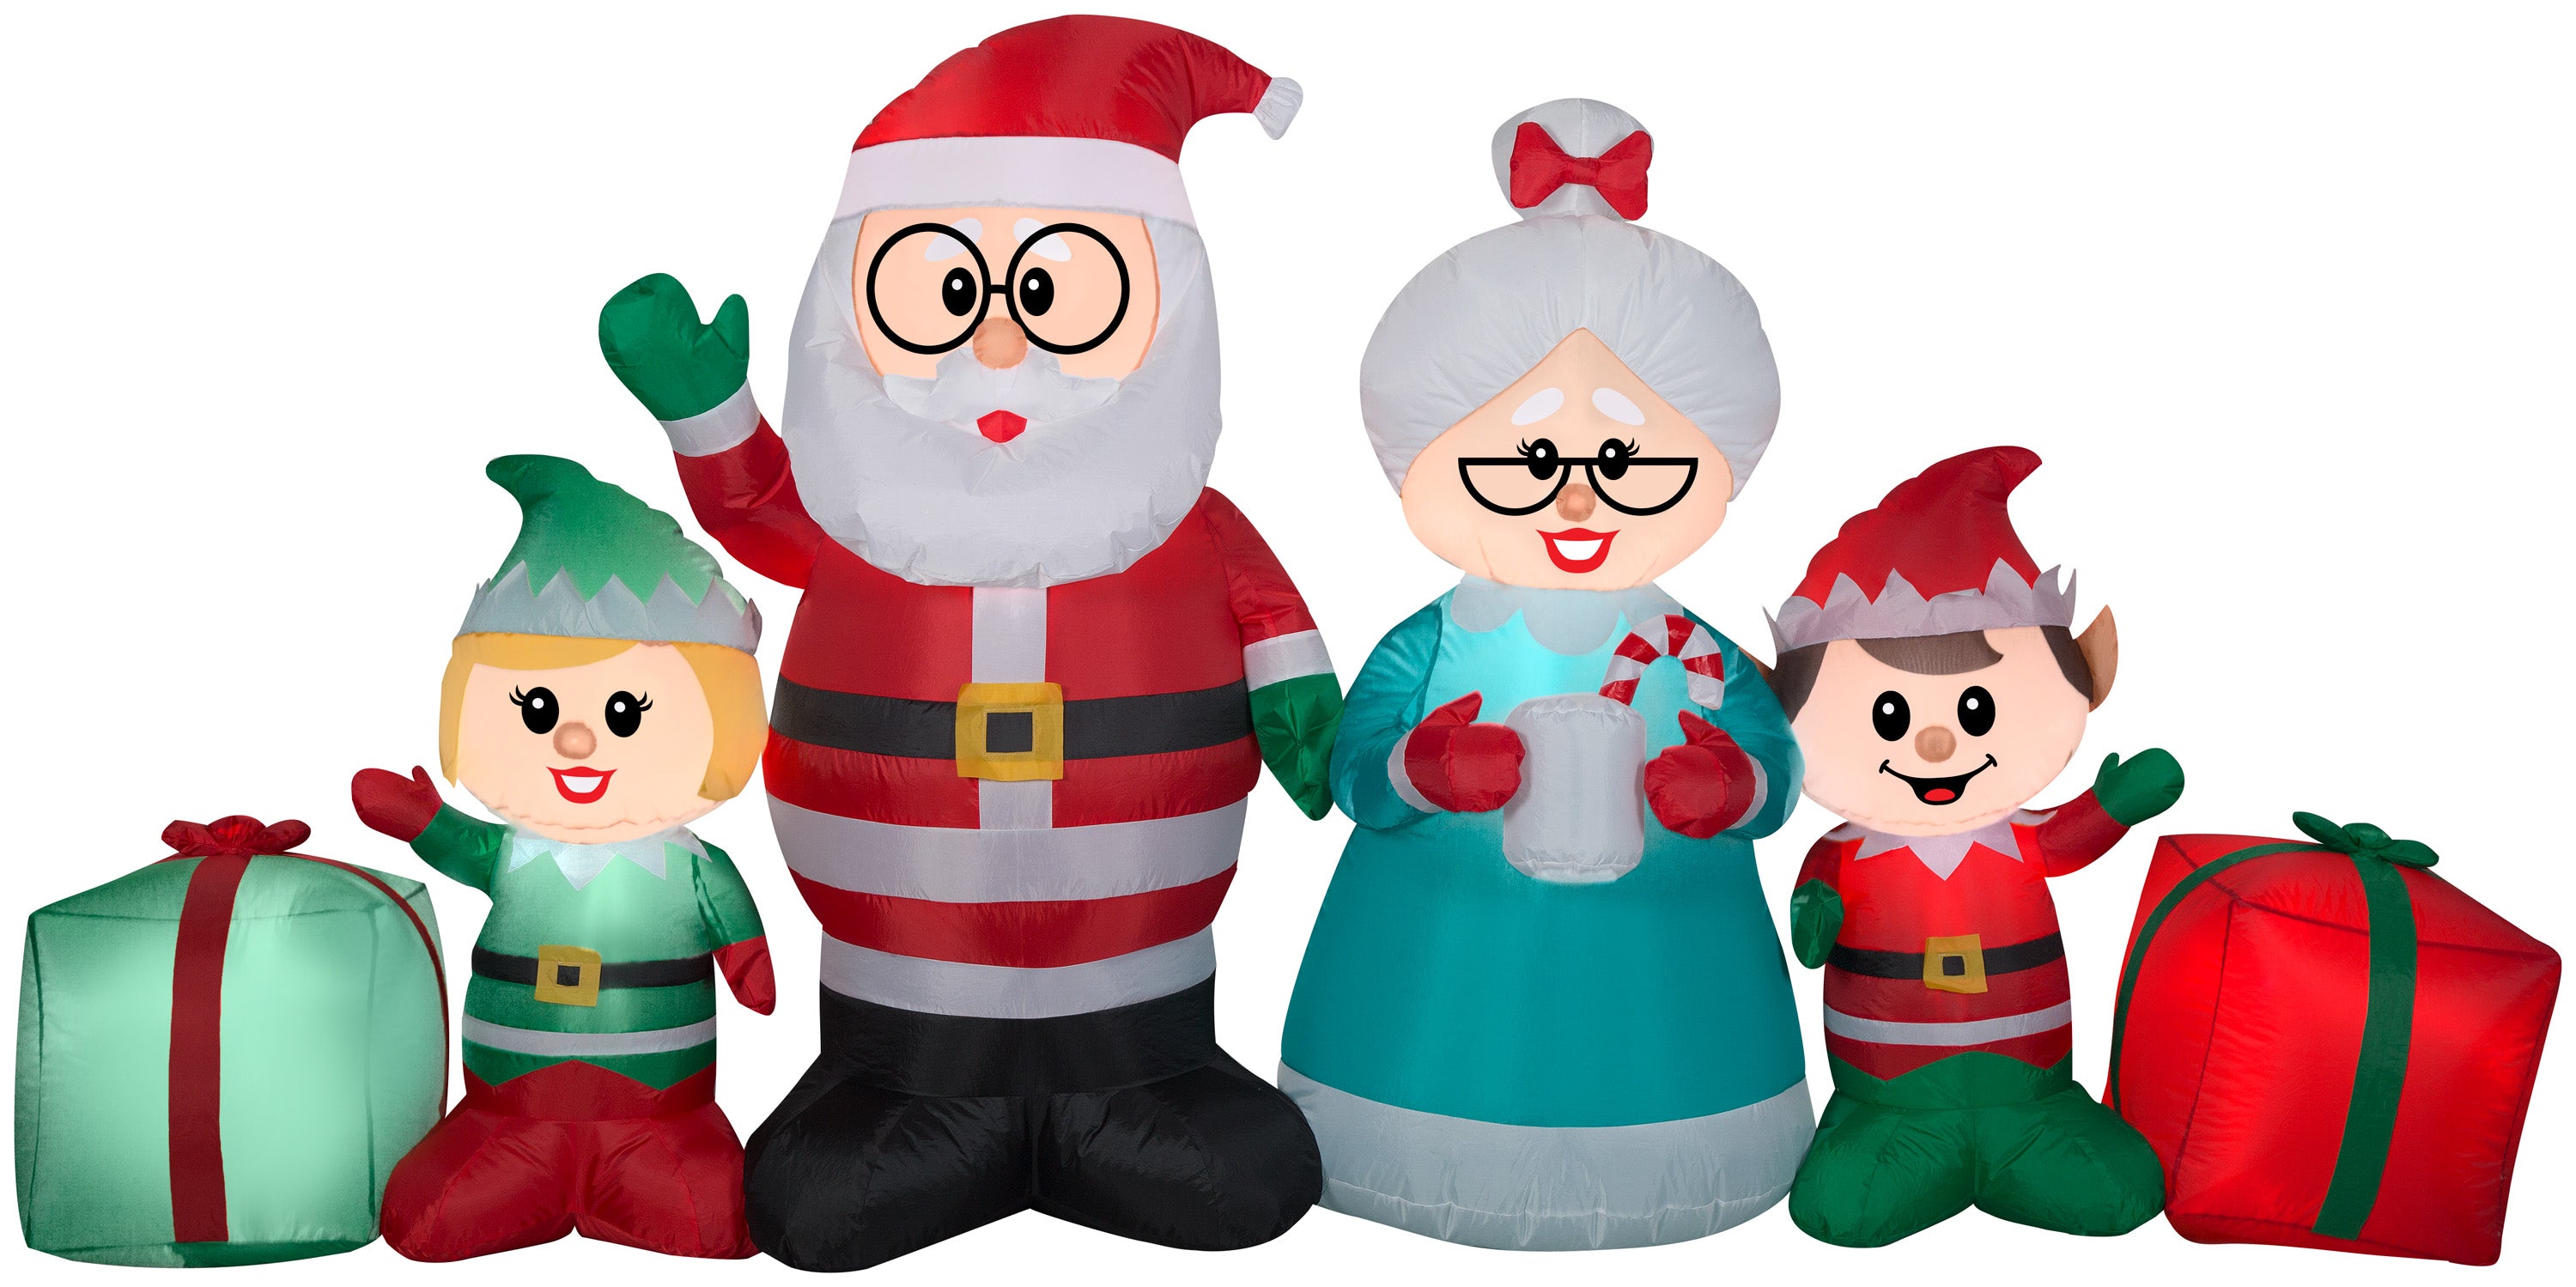 Gemmy Christmas Airblown Inflatable Claus Family Collection Scene, 4.5 ft Tall, Multicolored